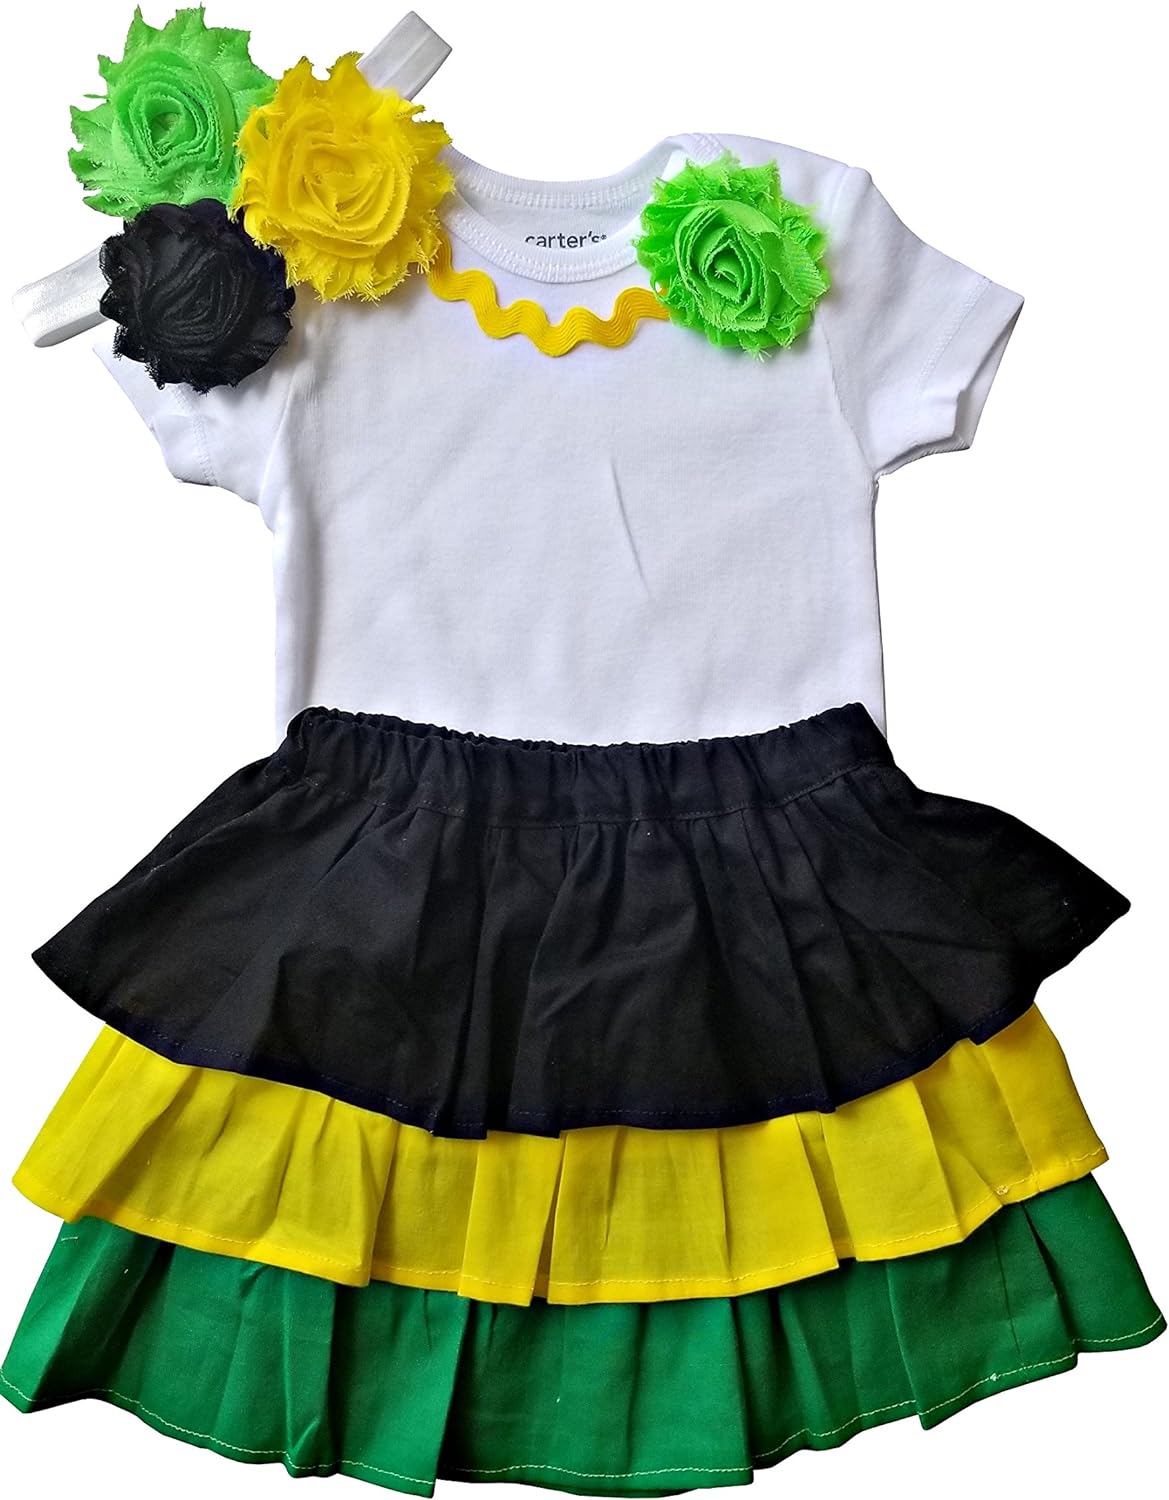  Perfect Pairz Jamaica Dress Clothes For Baby Clothing, buy baby designer clothes online